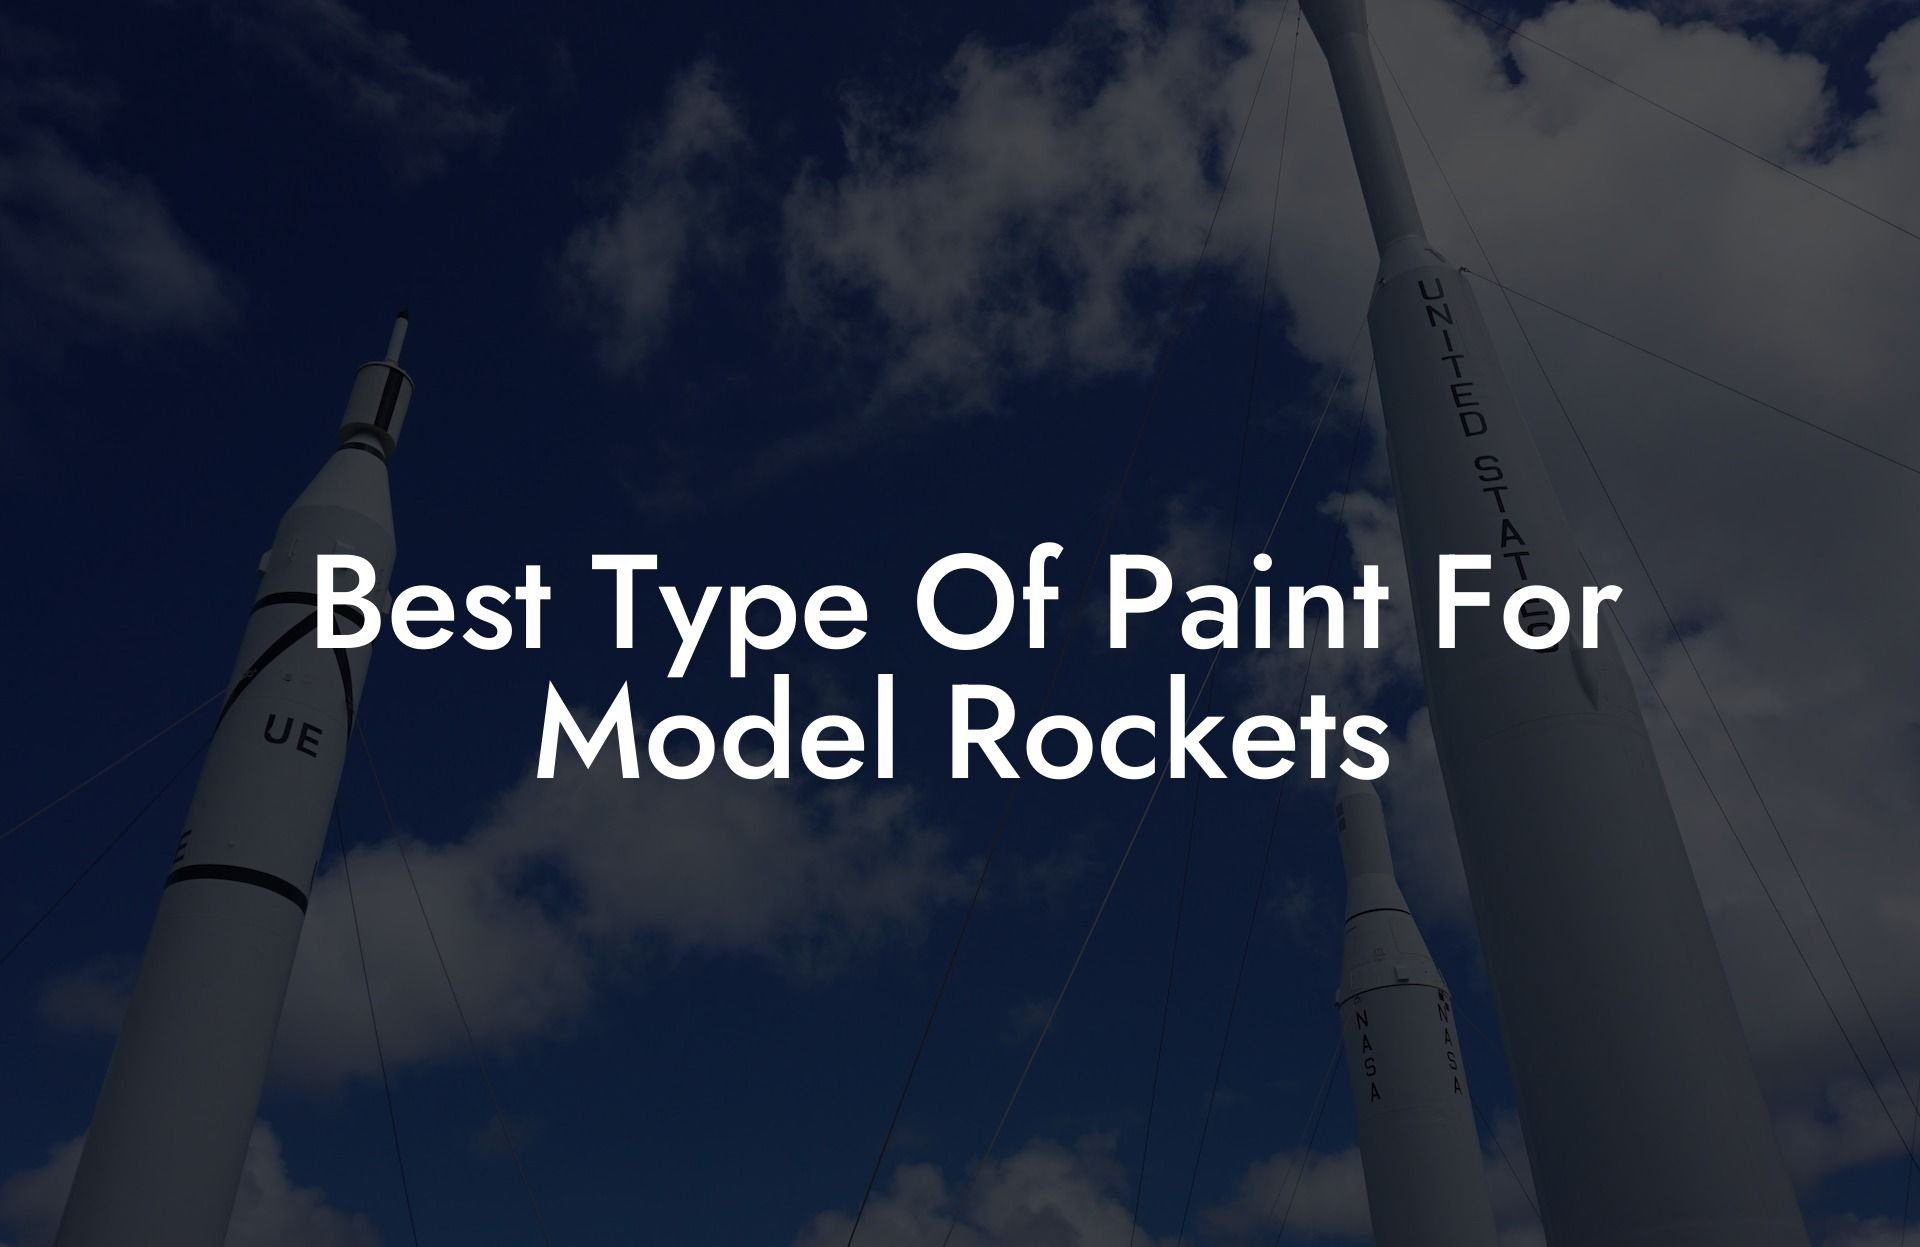 Best Type Of Paint For Model Rockets